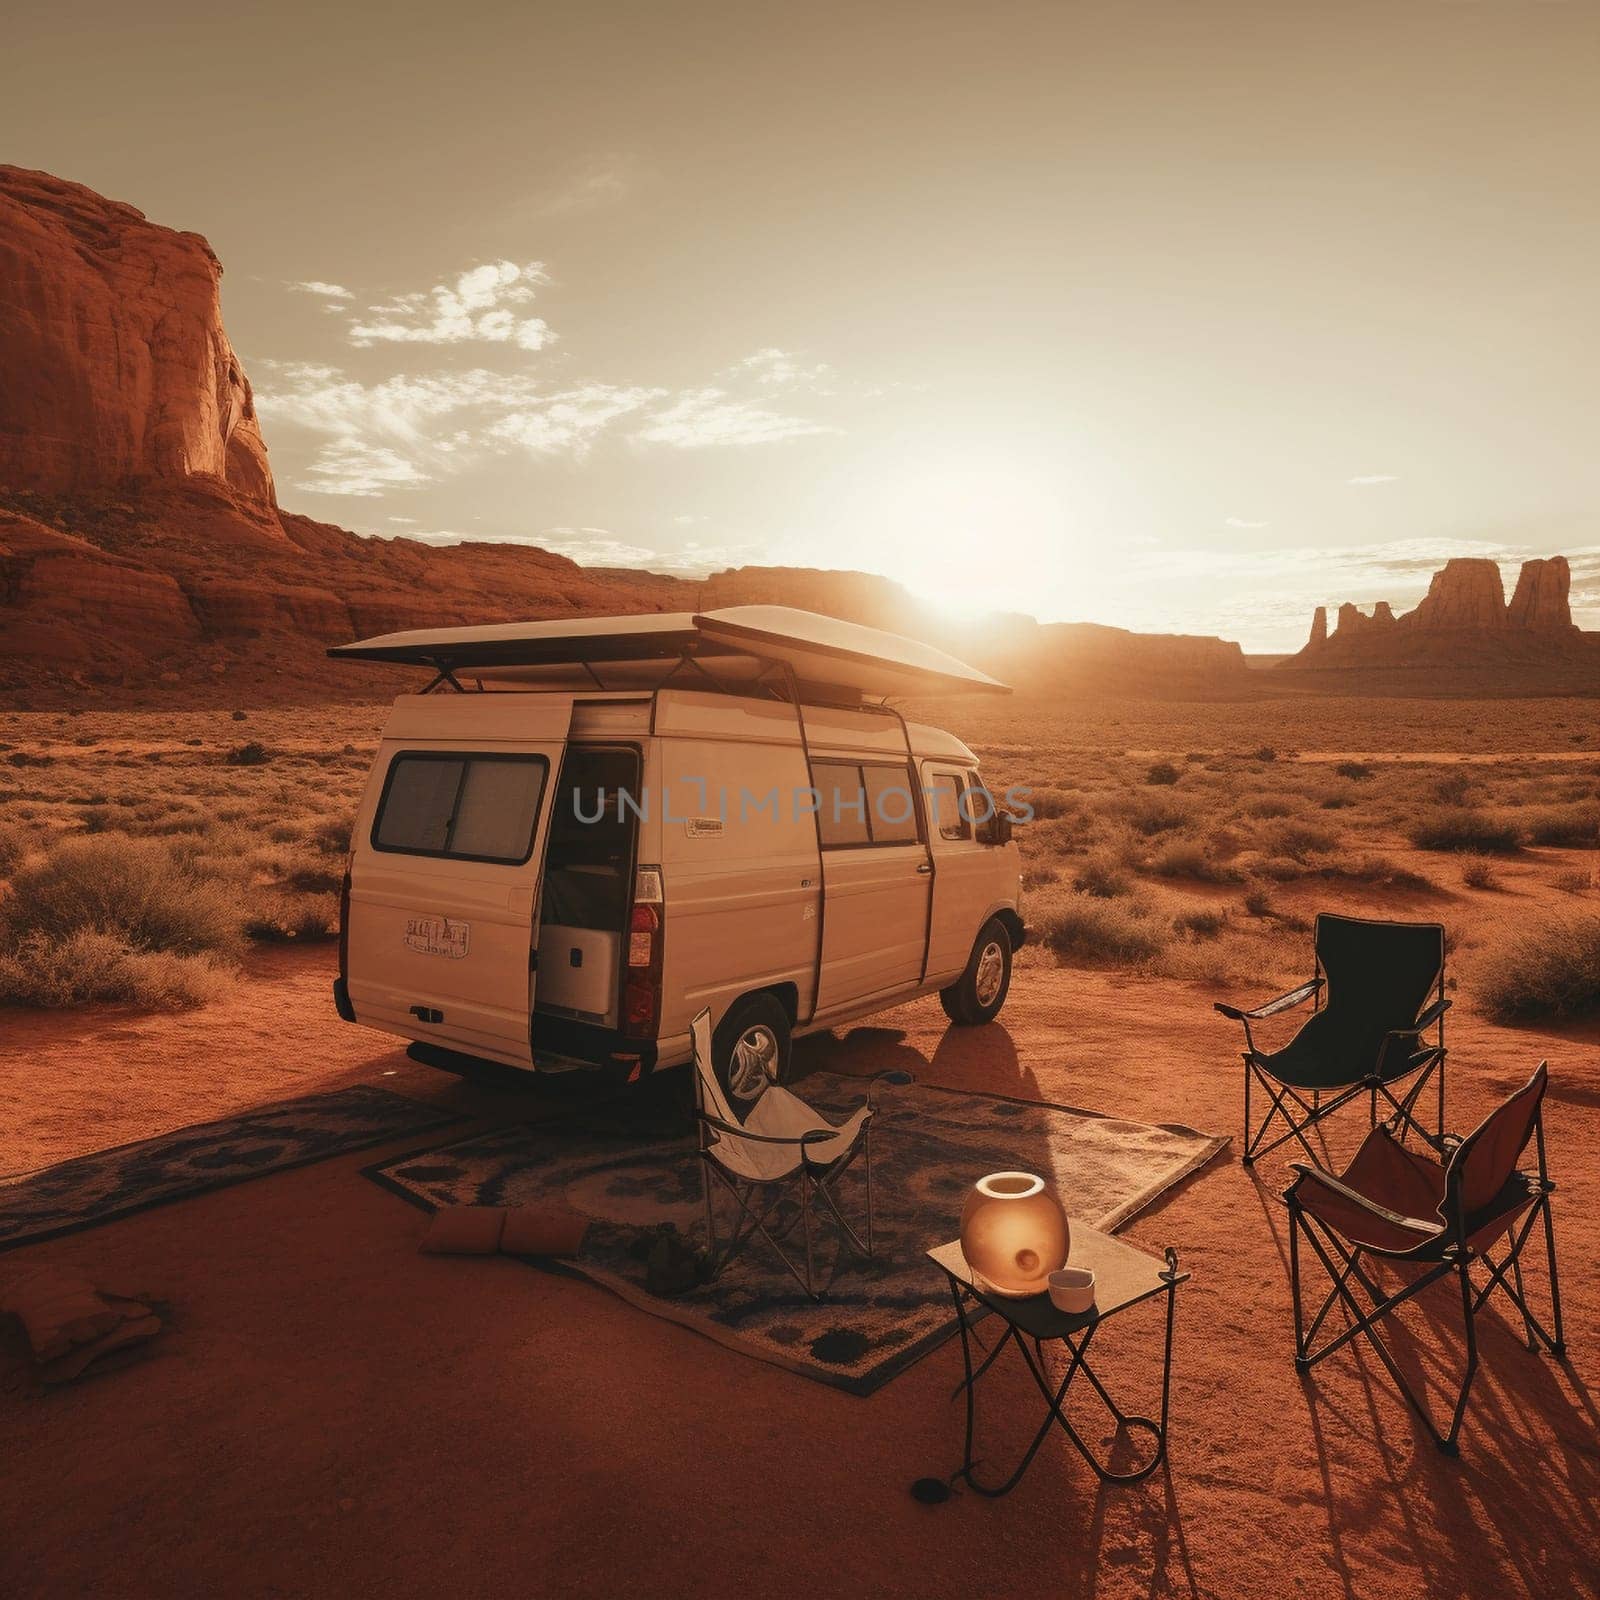 Experience the beauty of the desert with this image of a camper van parked on the edge of a desert canyon, with red rock formations visible in the distance. The van's exterior is covered in dust, bearing the mark of the adventure, and a set of solar panels are visible on the roof, powering the van's amenities. A pair of camp chairs are set up outside the van, offering a peaceful spot to watch the sunset over the canyon, creating an unforgettable moment. This is the perfect location for a wild adventure and a peaceful escape.